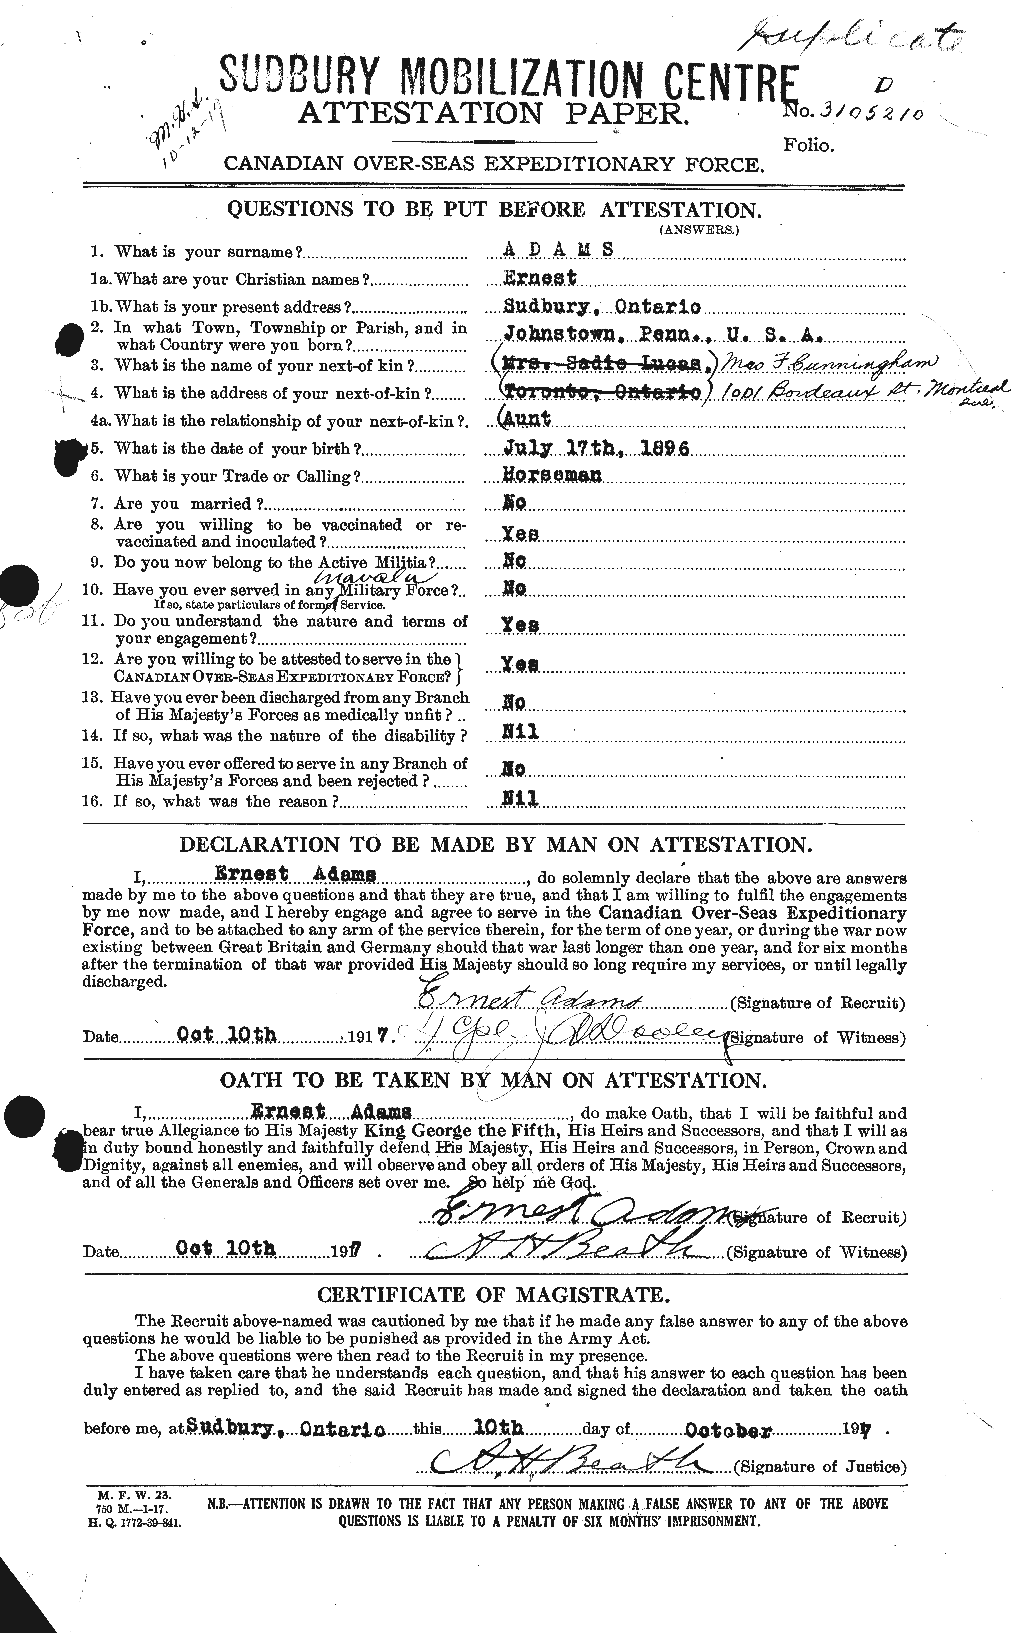 Personnel Records of the First World War - CEF 202587a